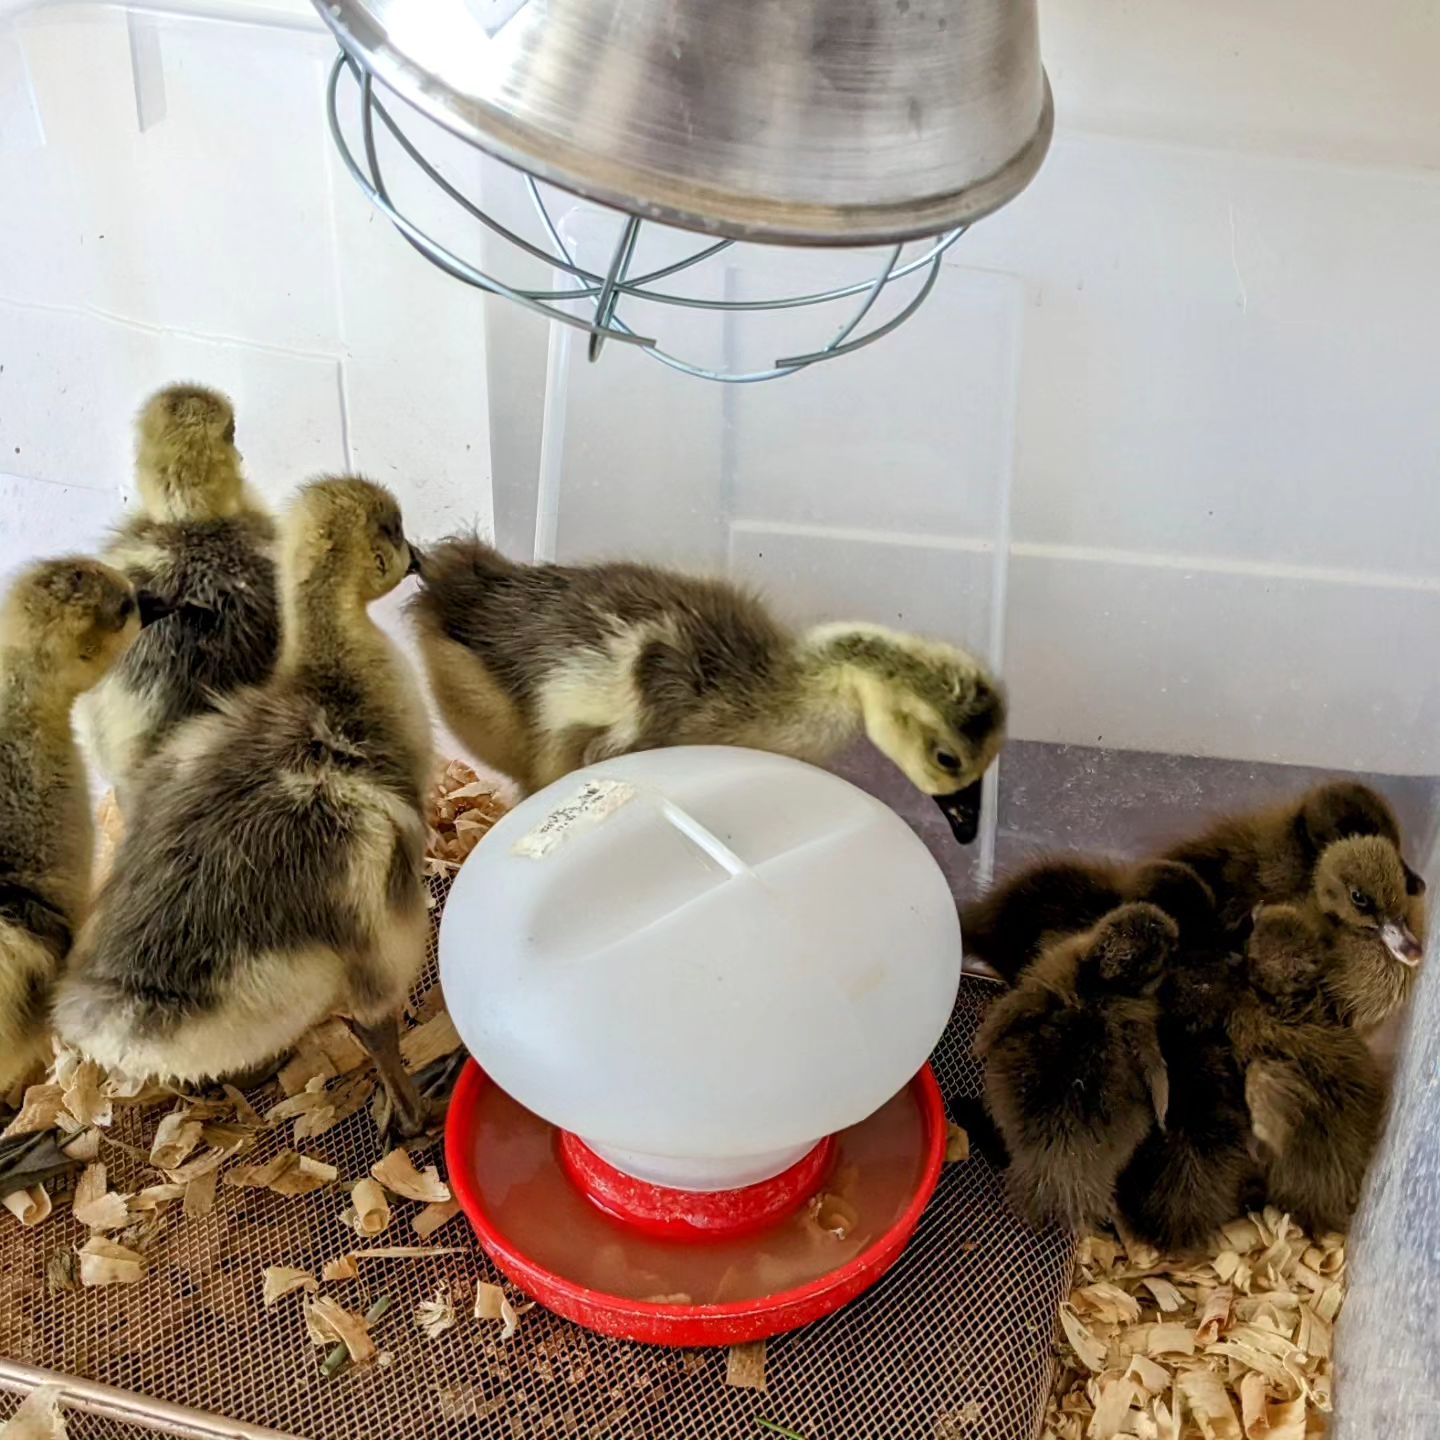 Poultry team growing: 6 Khaki Campbell ducklings joined yesterday